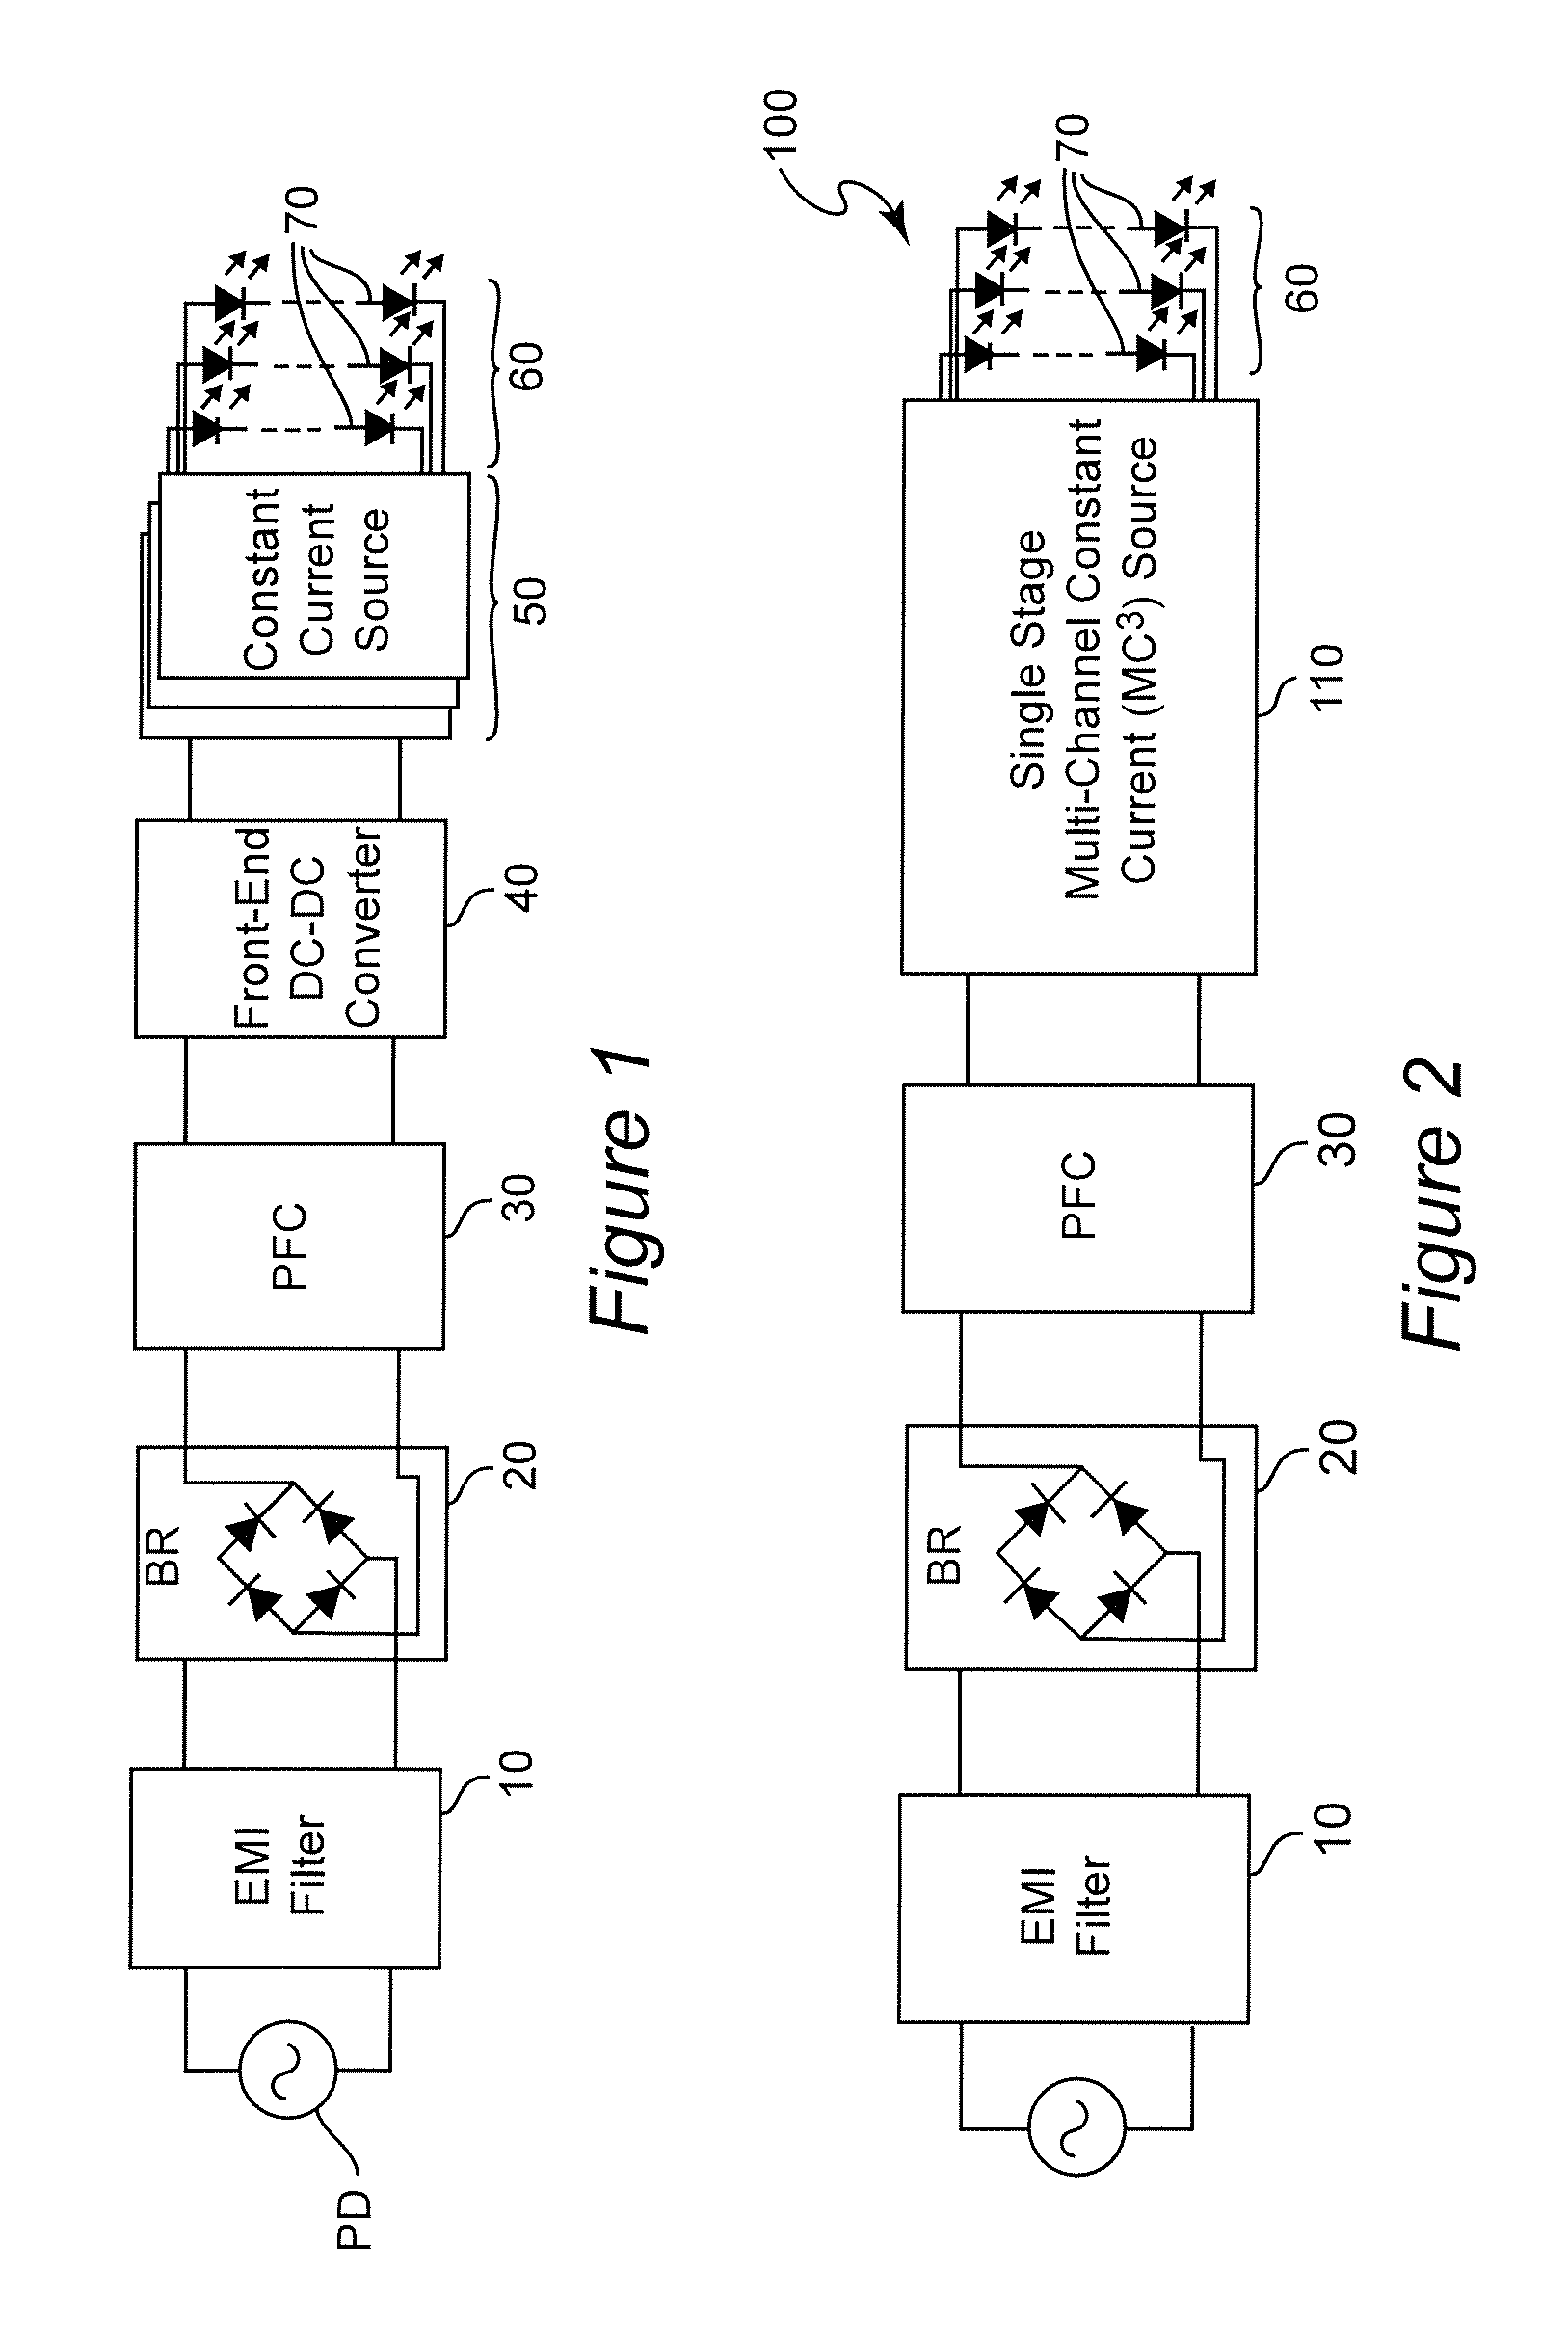 Multi-channel constant current source and illumination source